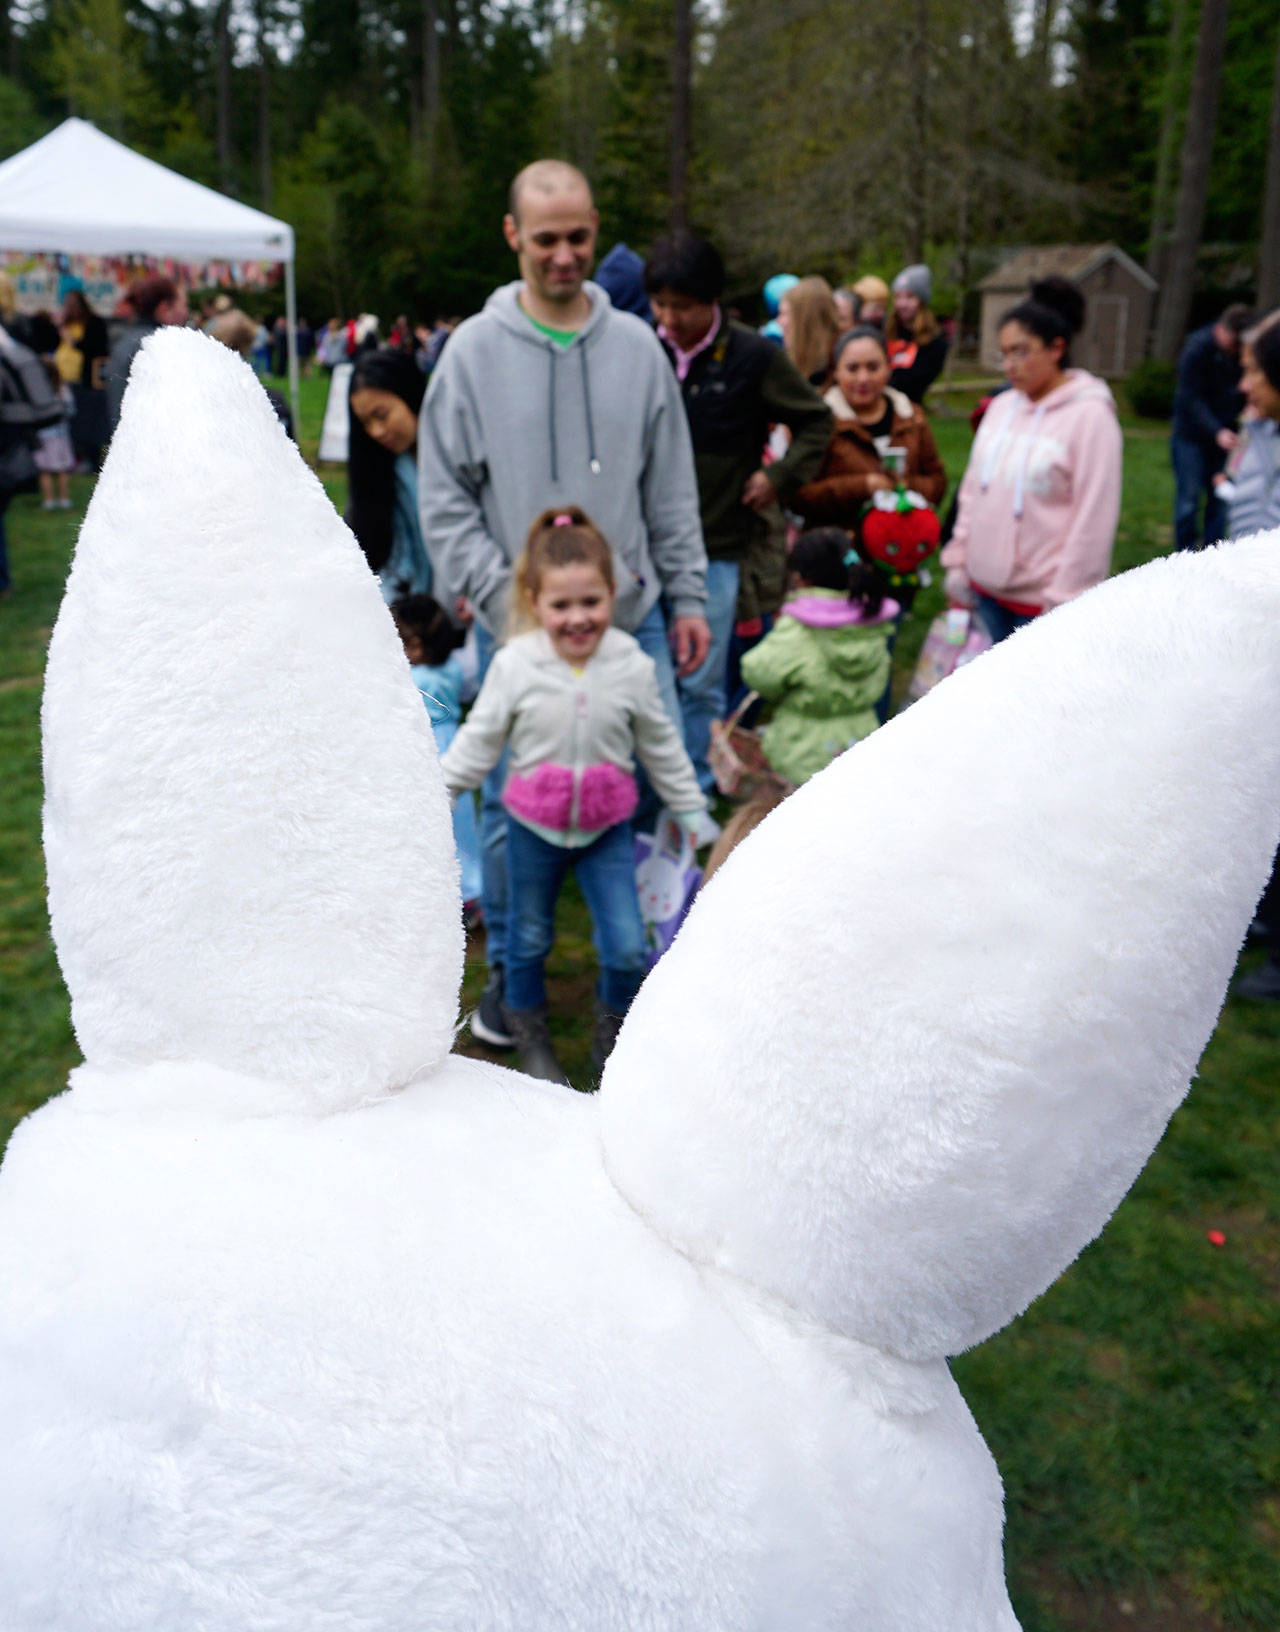 Between the ears: the Easter Bunny awaits the arrival of another young greeter. (Bob Smith | Kitsap Daily News)